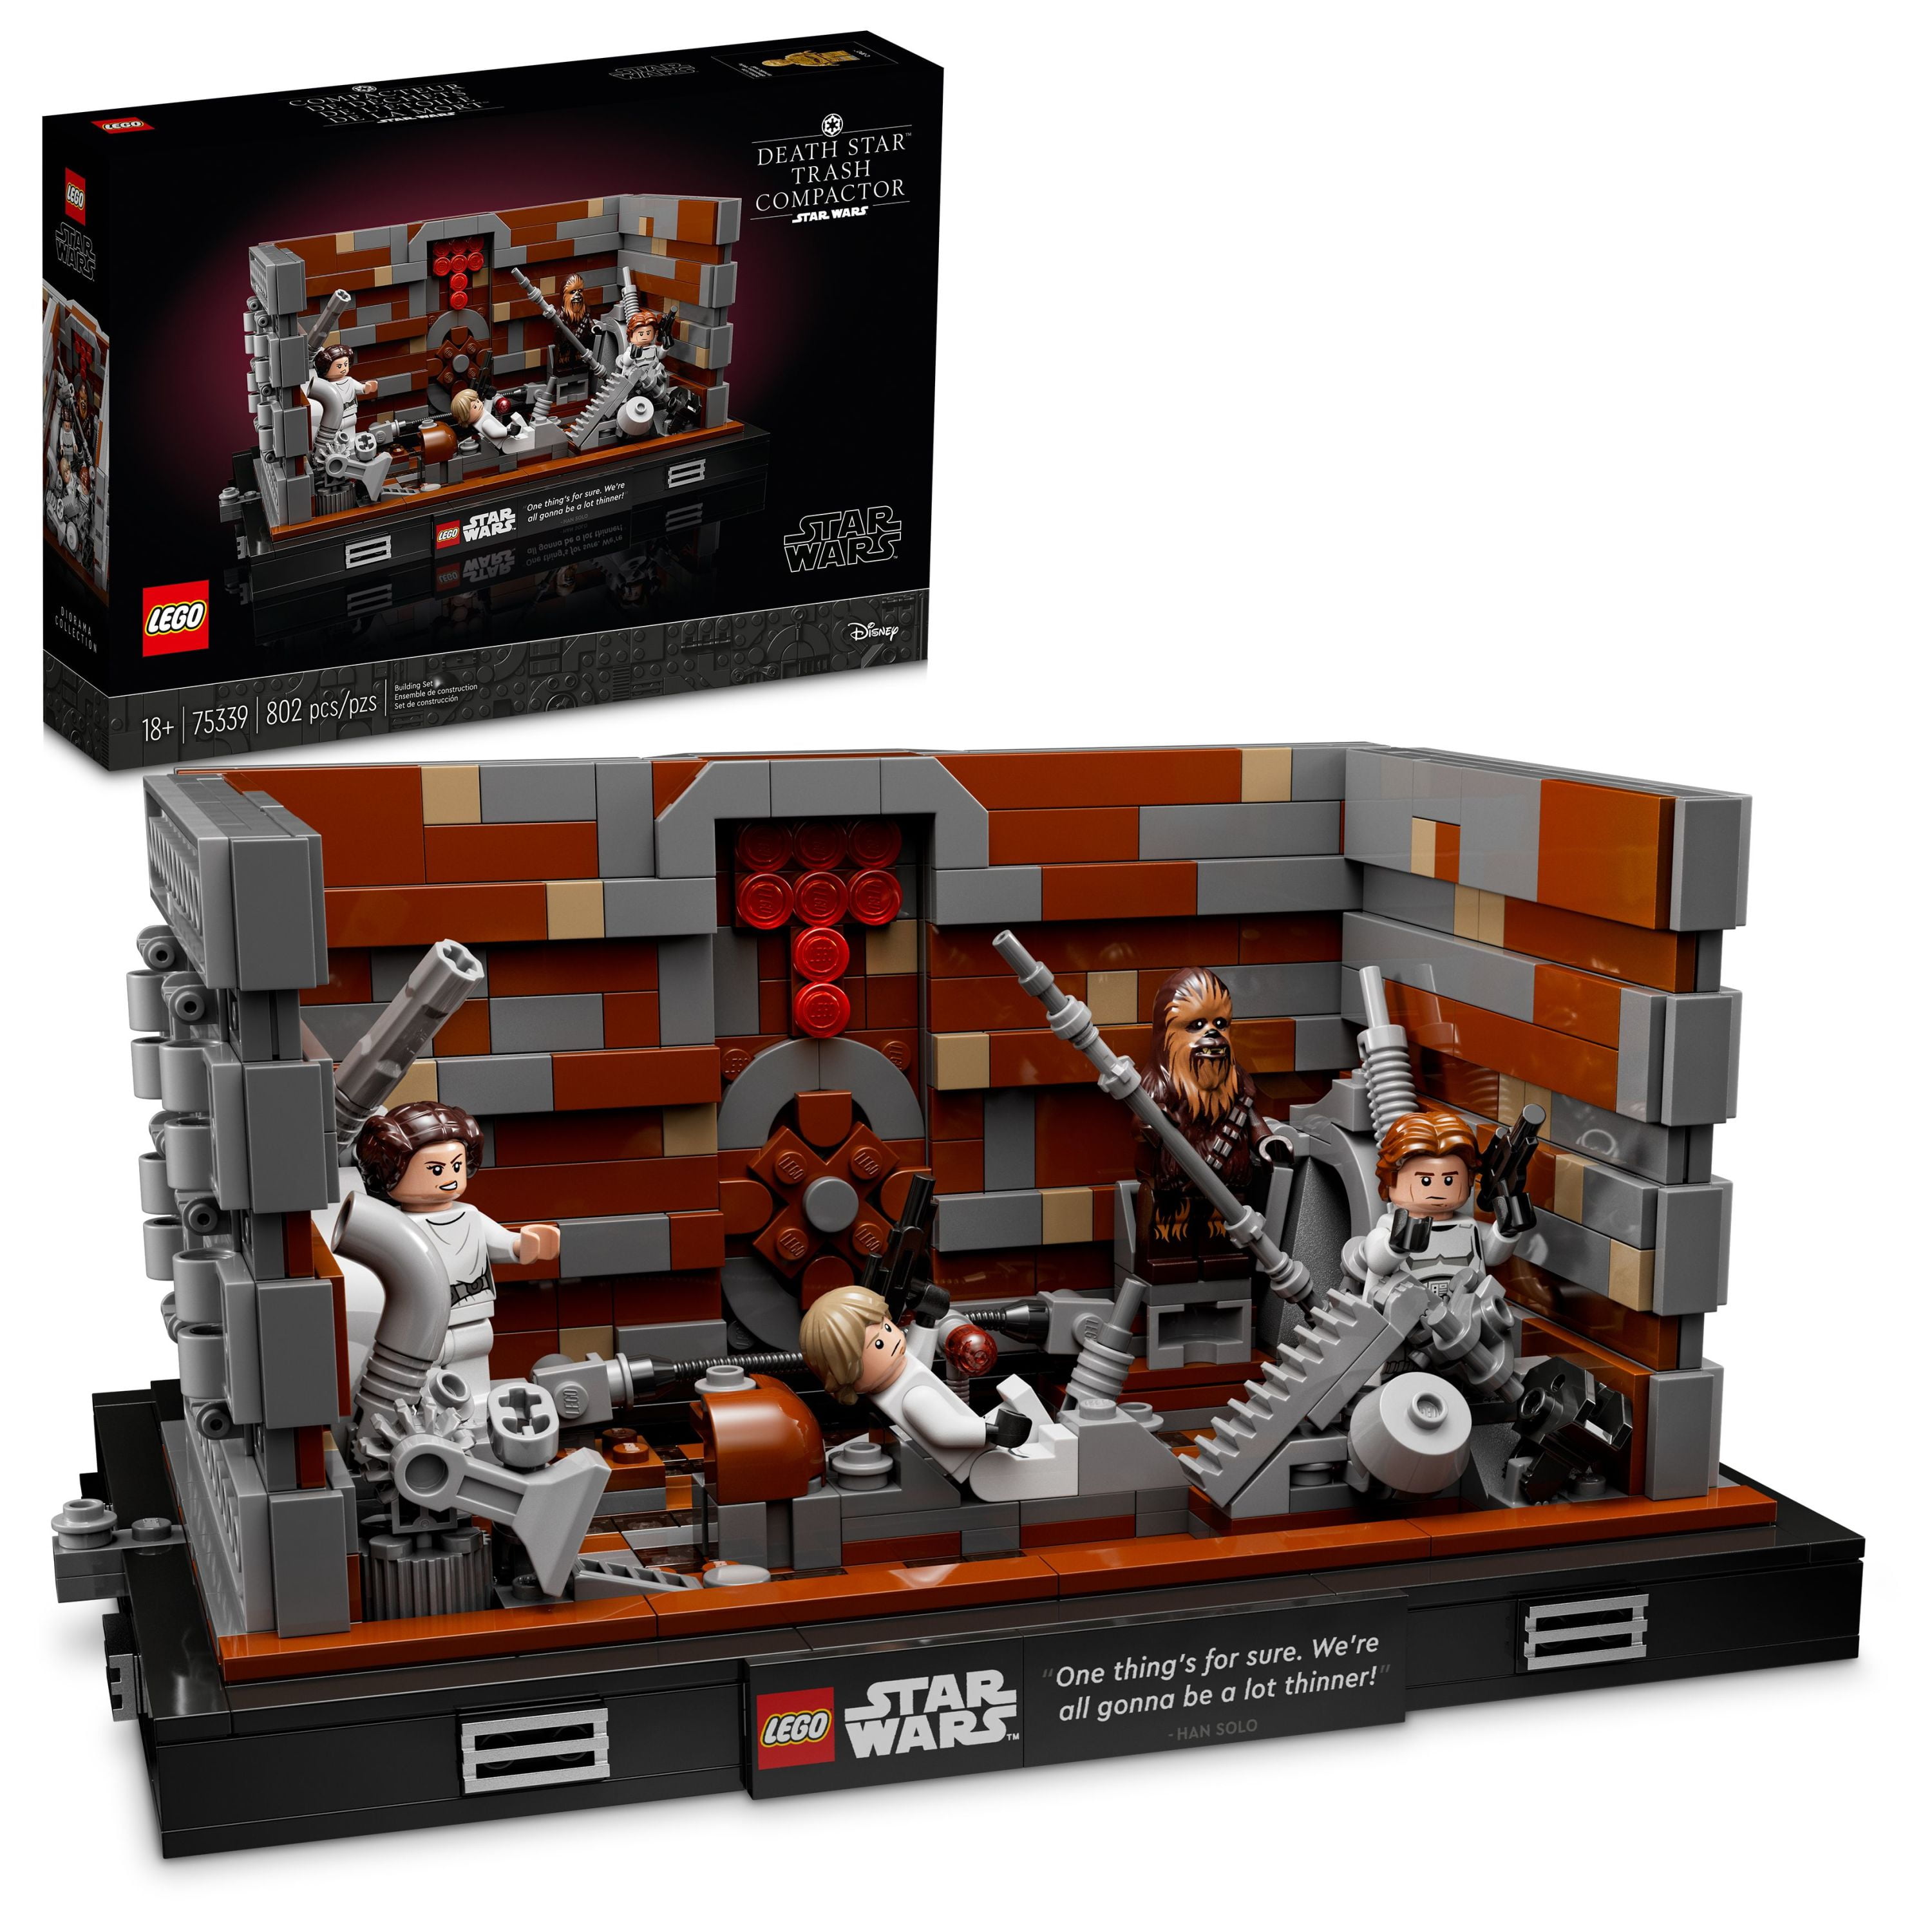 LEGO Star Wars Death Star Trash Compactor Diorama Series 75339 Adult Building Set 6 Star Wars Figures including Leia, Chewbacca & R2-D2, Gift for Star Wars Fans -